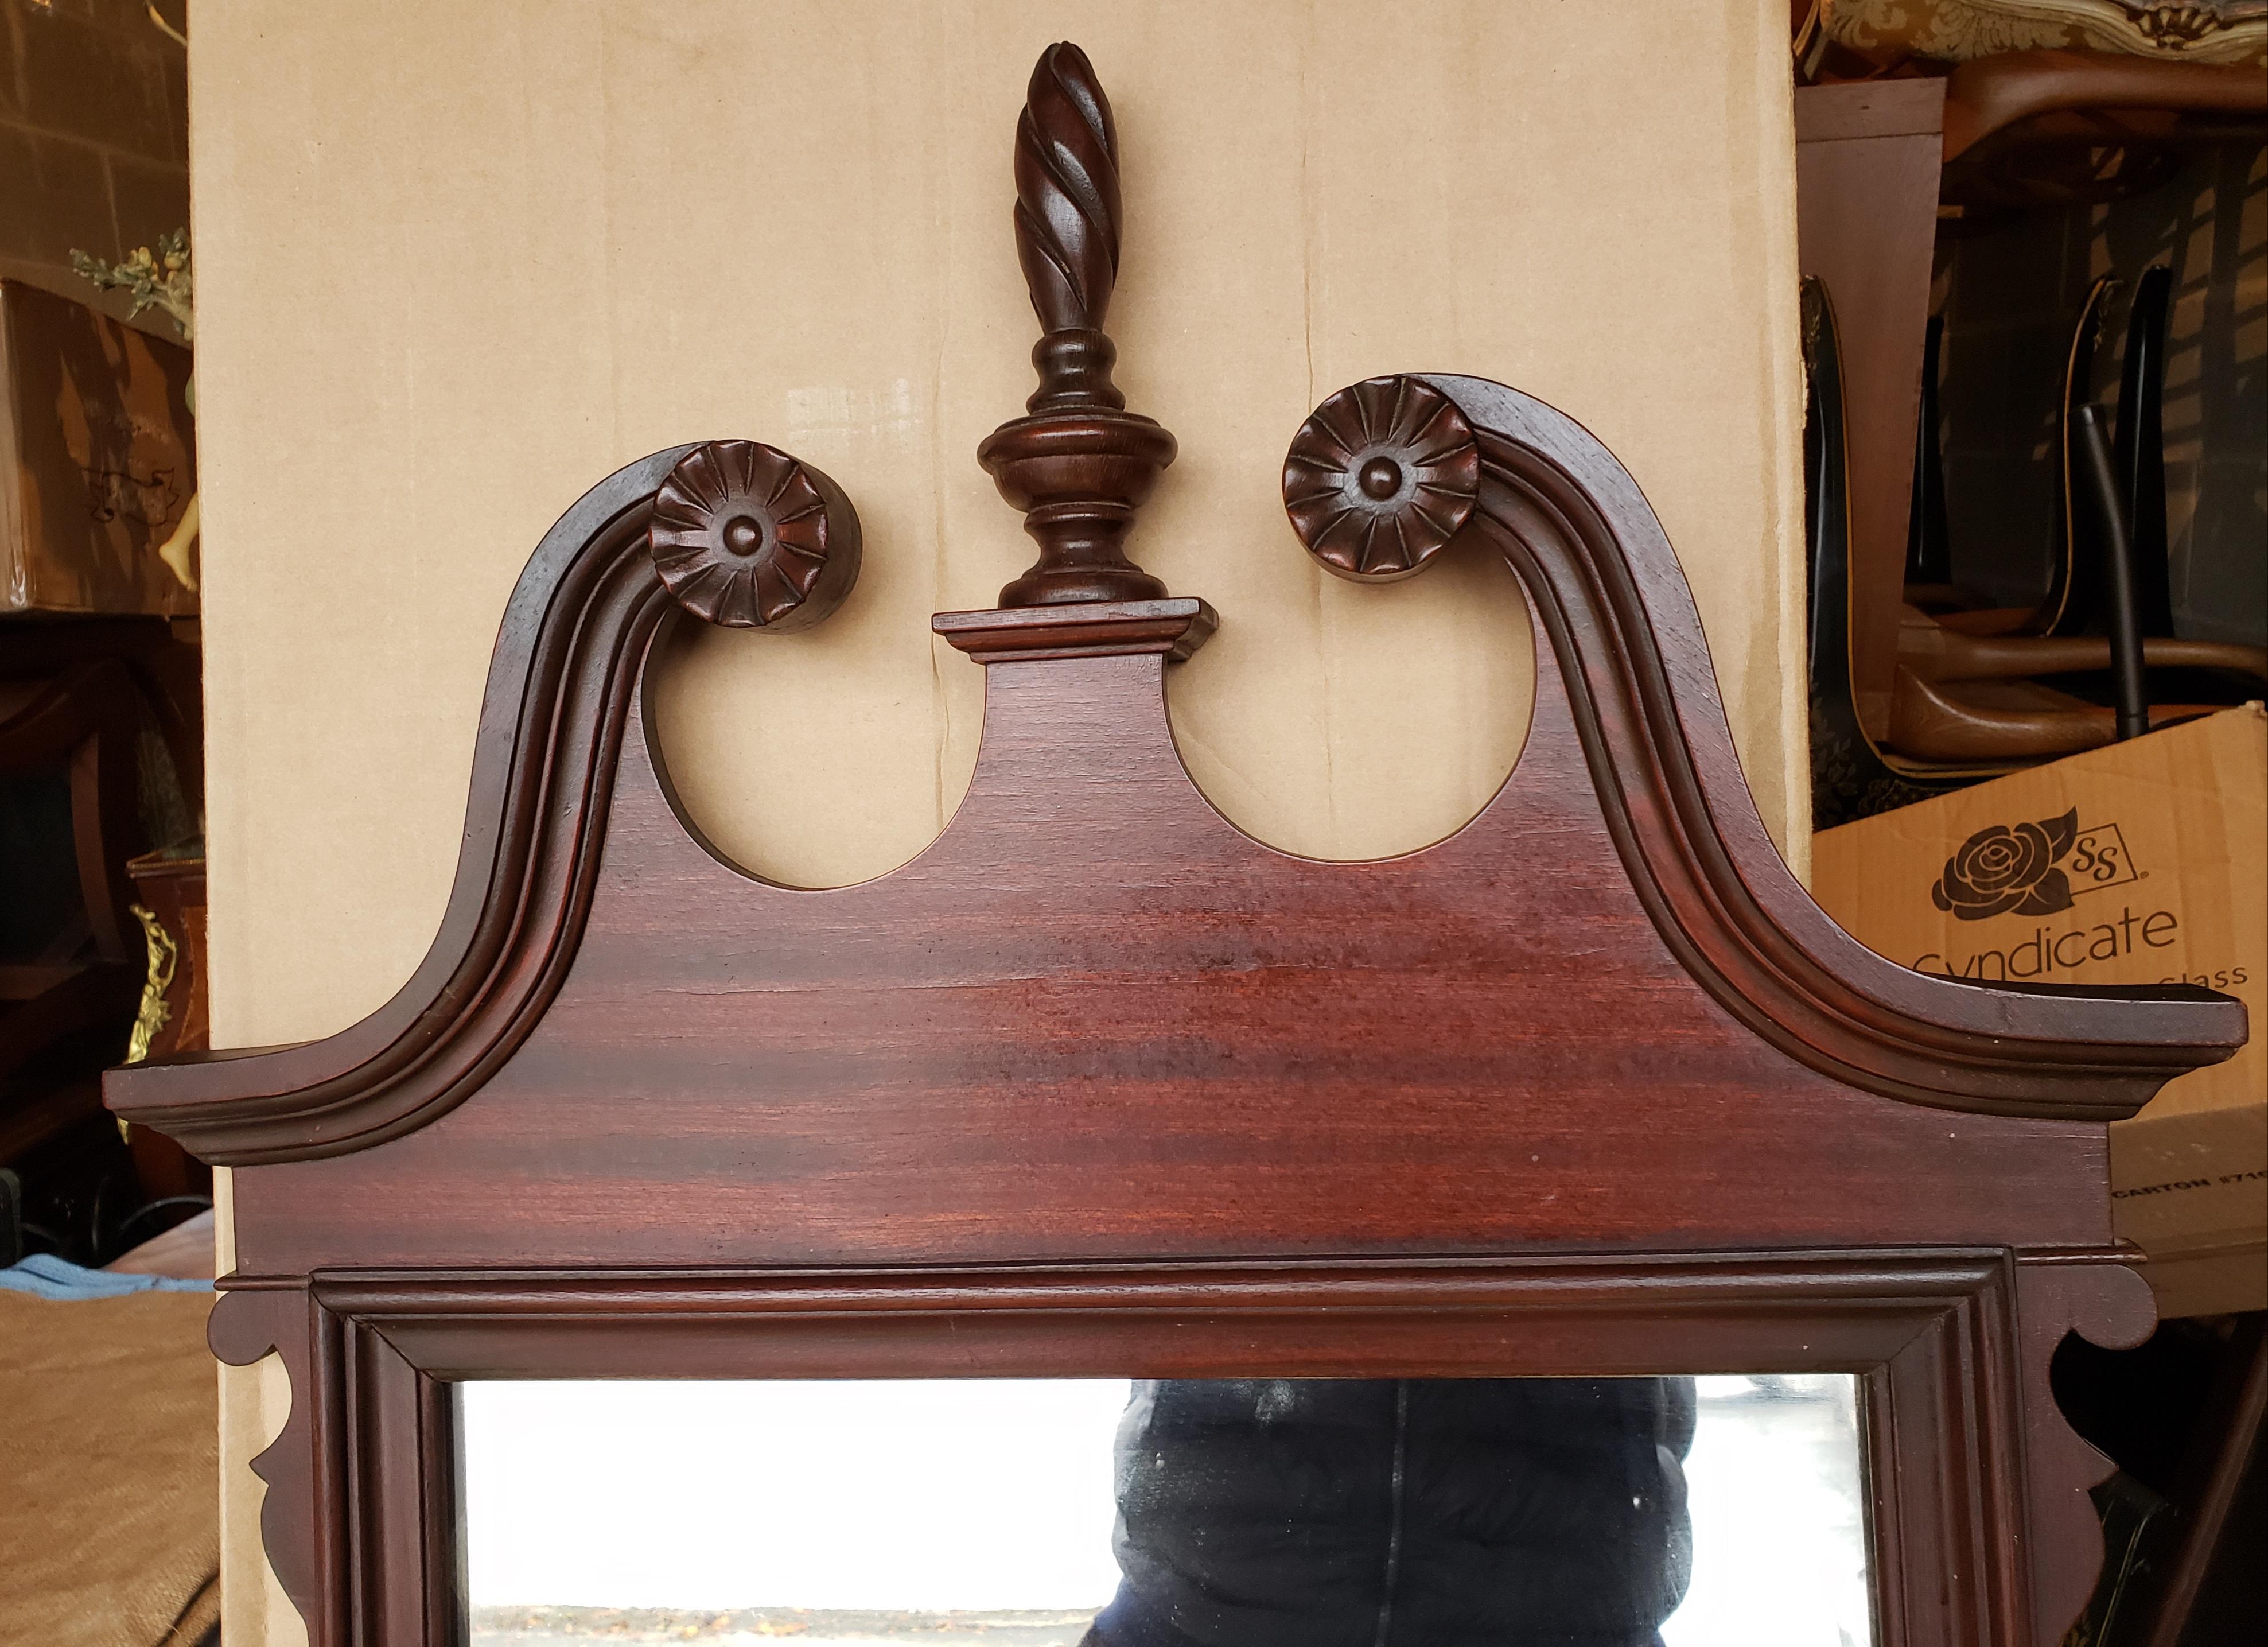 Early 1900s Chippendale Mahogany wall mirror. Good condition with few signs of aging and wear appropriate with age.
Measures 22